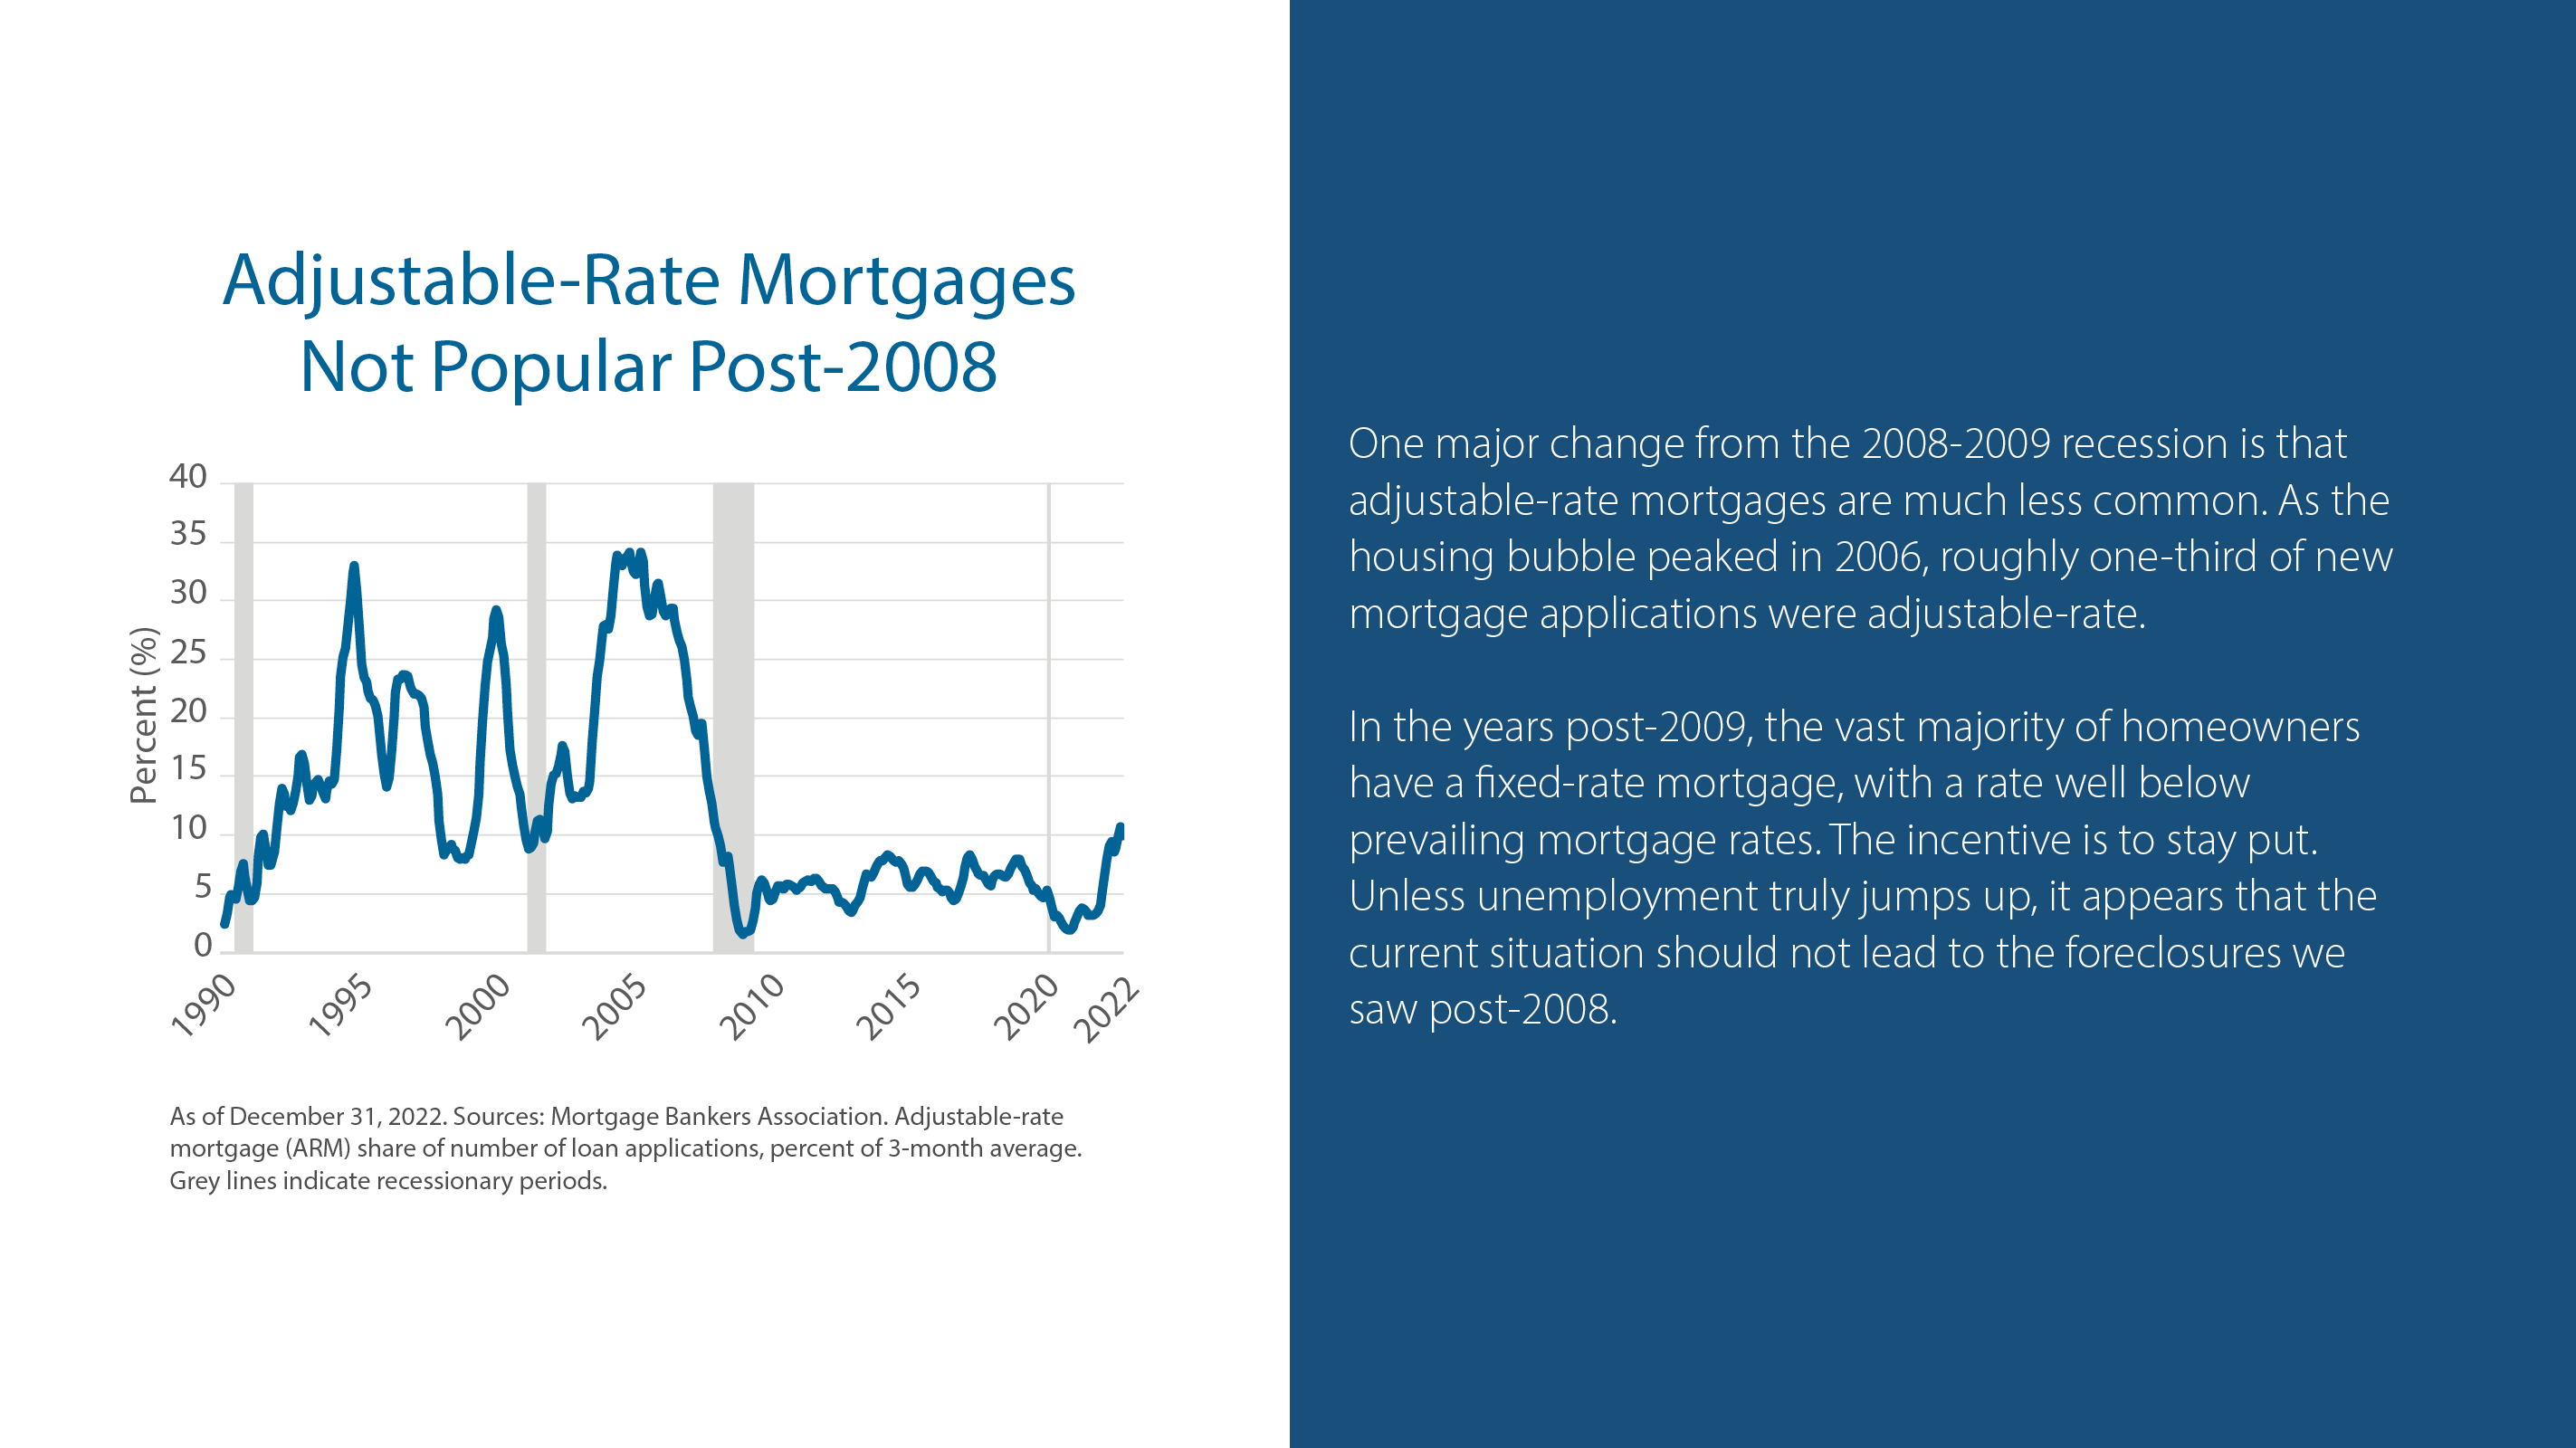 Adjustable-Rate Mortgages Not Popular Post-2008